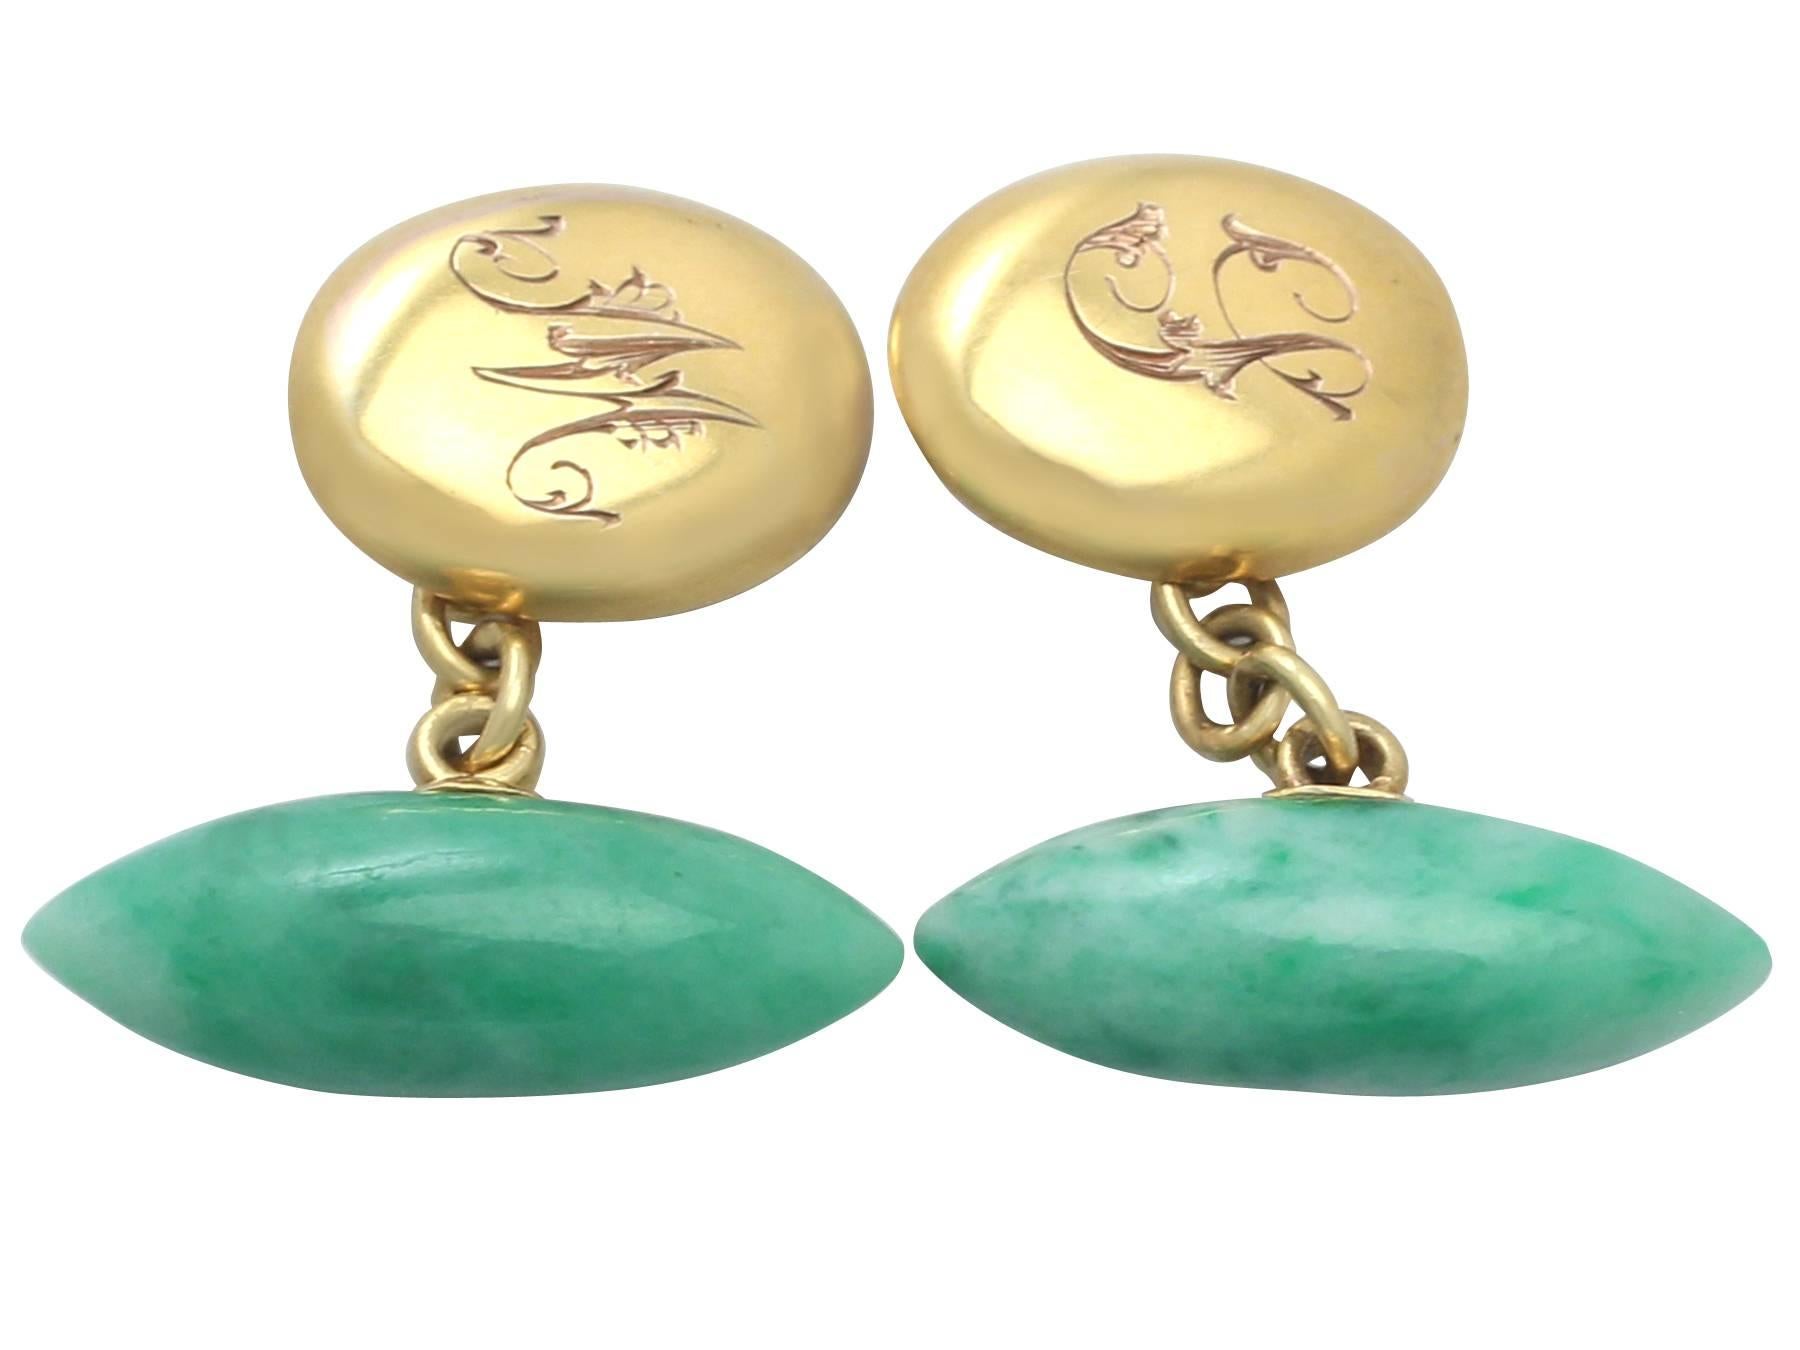 A fine and impressive antique pair of jade and 15 karat yellow gold cufflinks; part of our antique jewelry and estate jewelry collections

These impressive antique jade cufflinks have been crafted in 15k yellow gold.

The impressive feature torpedo